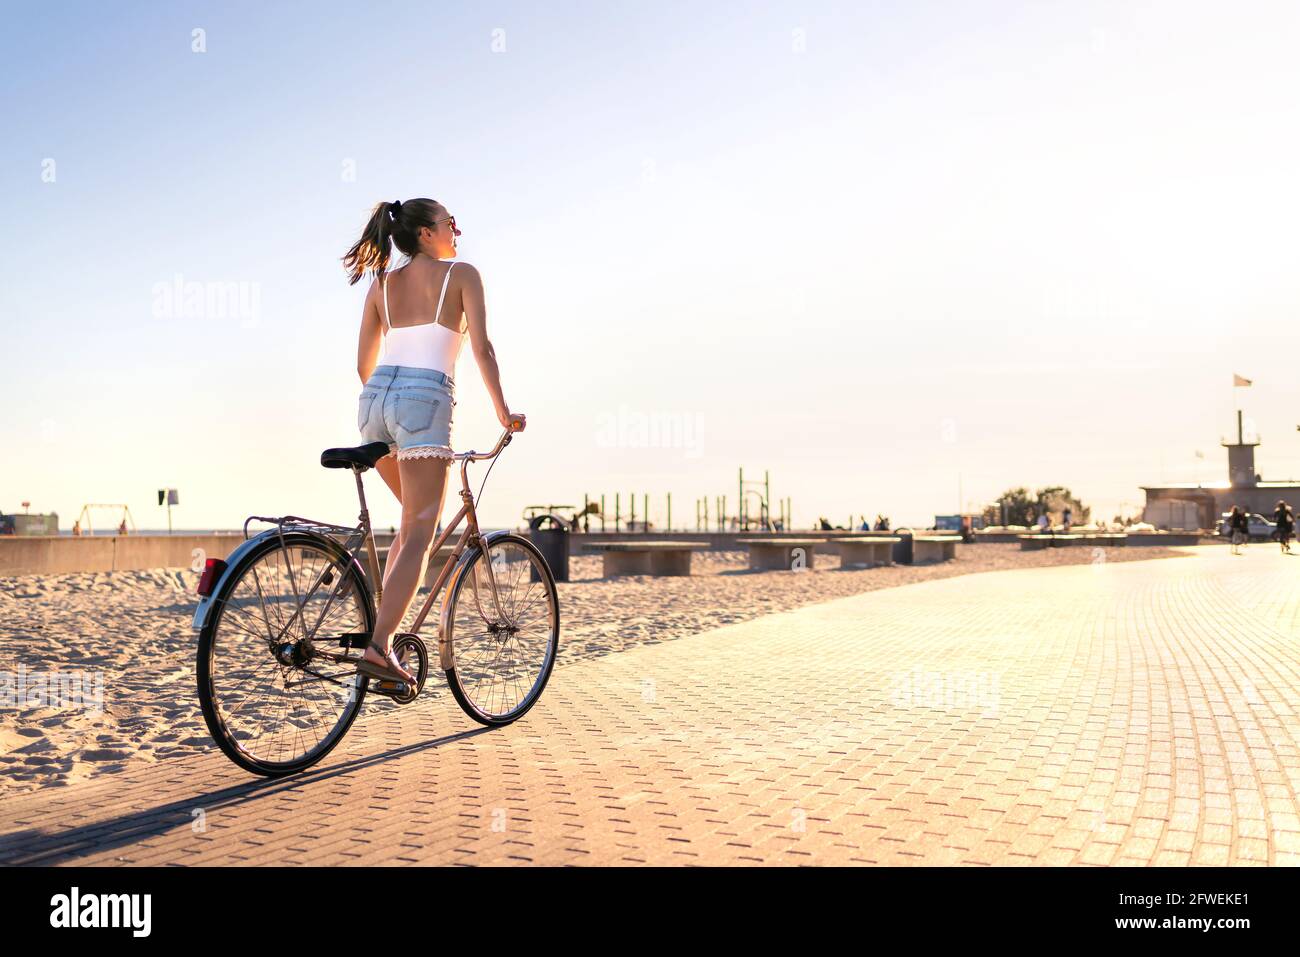 Bicycle fun on beach promenade. Happy woman riding bike on sunny summer boulevard. Seaside waterfront street for cycling. Stylish cyclist lady. Stock Photo